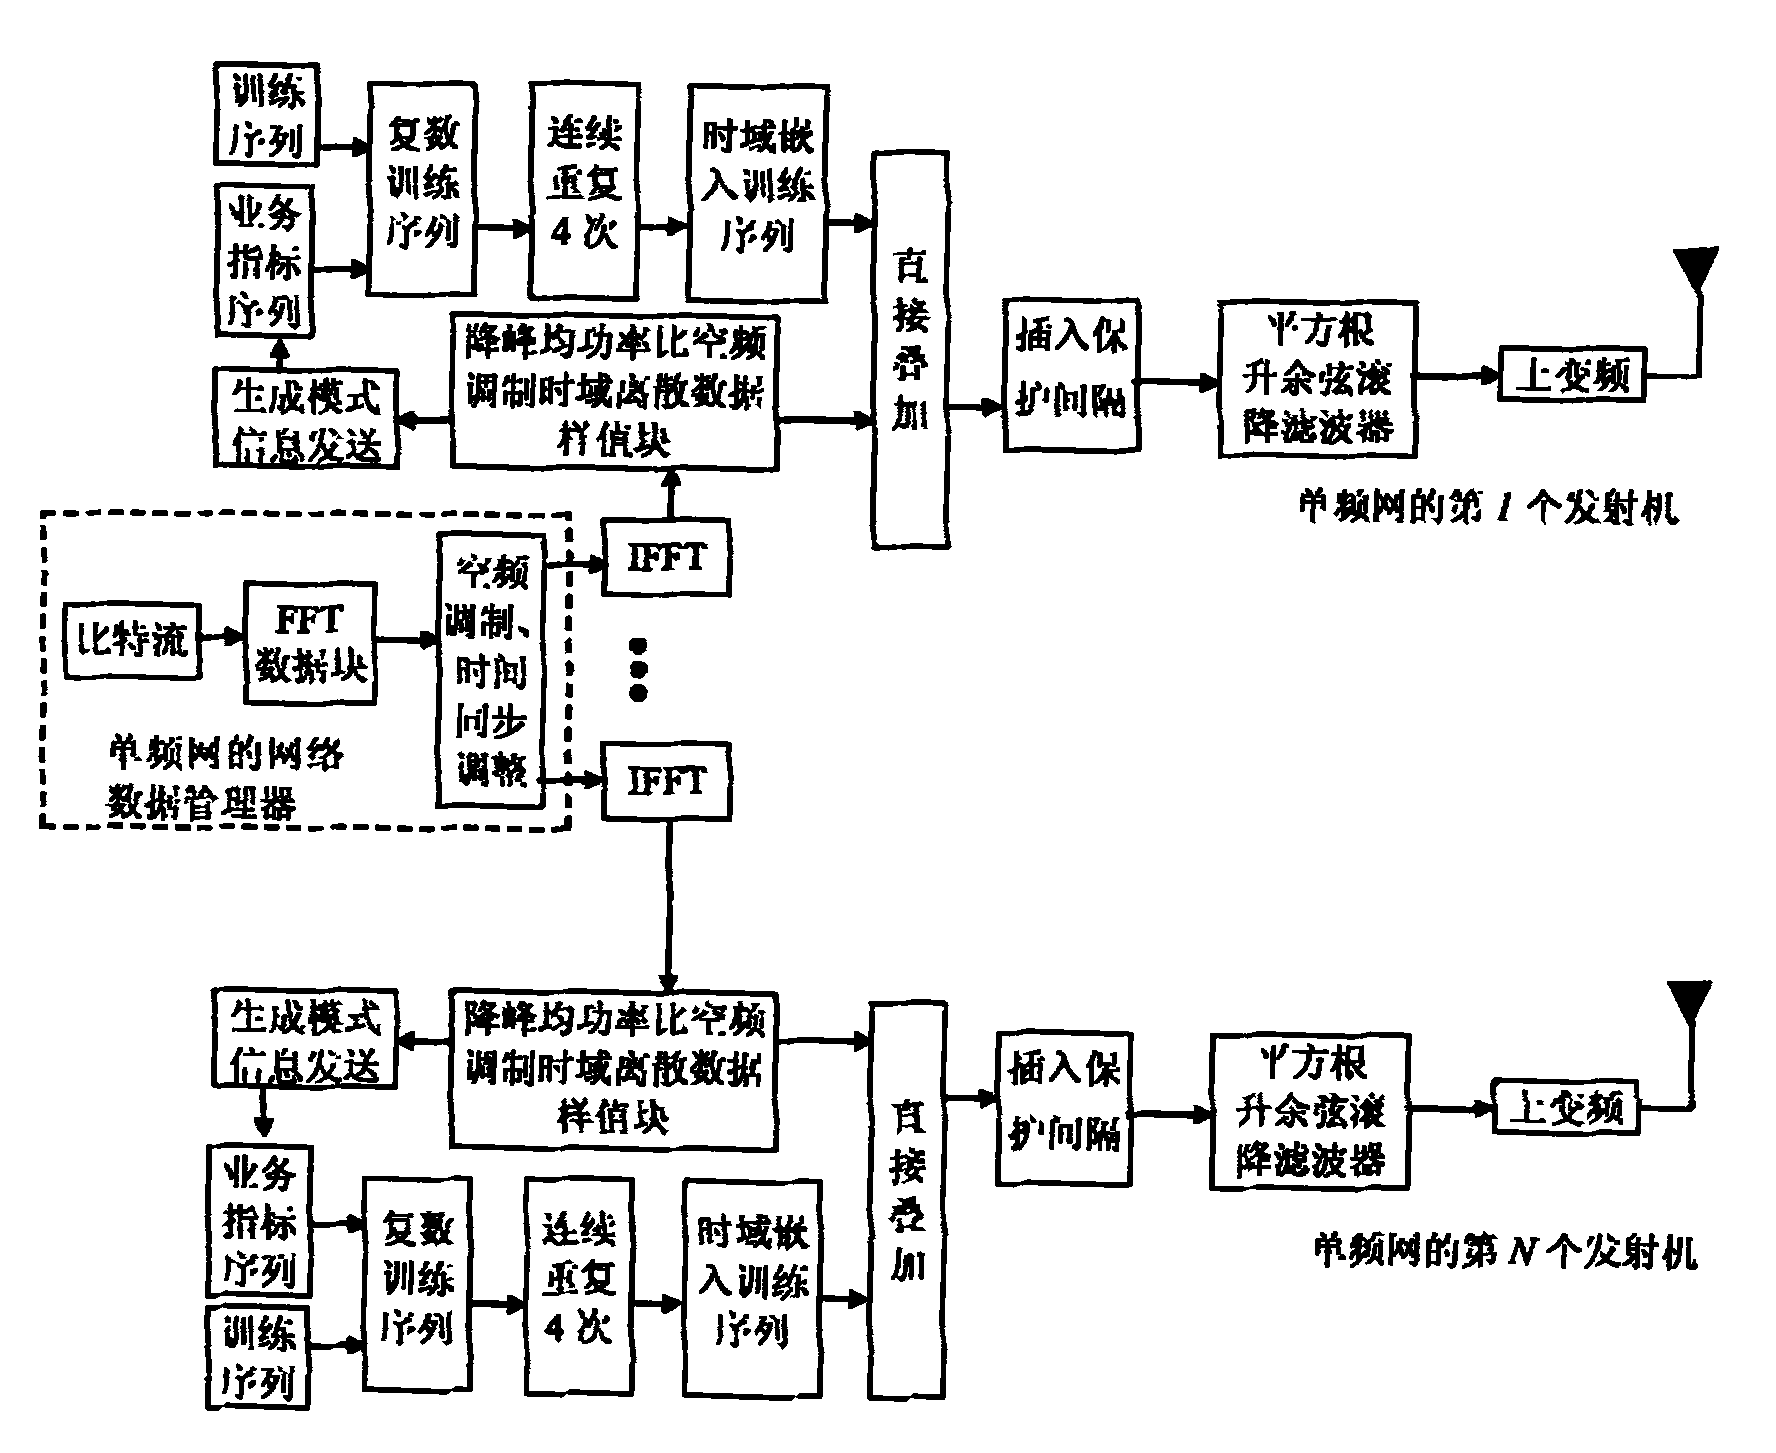 Wireless multimedia broadcast signal framing modulation method for single frequency network